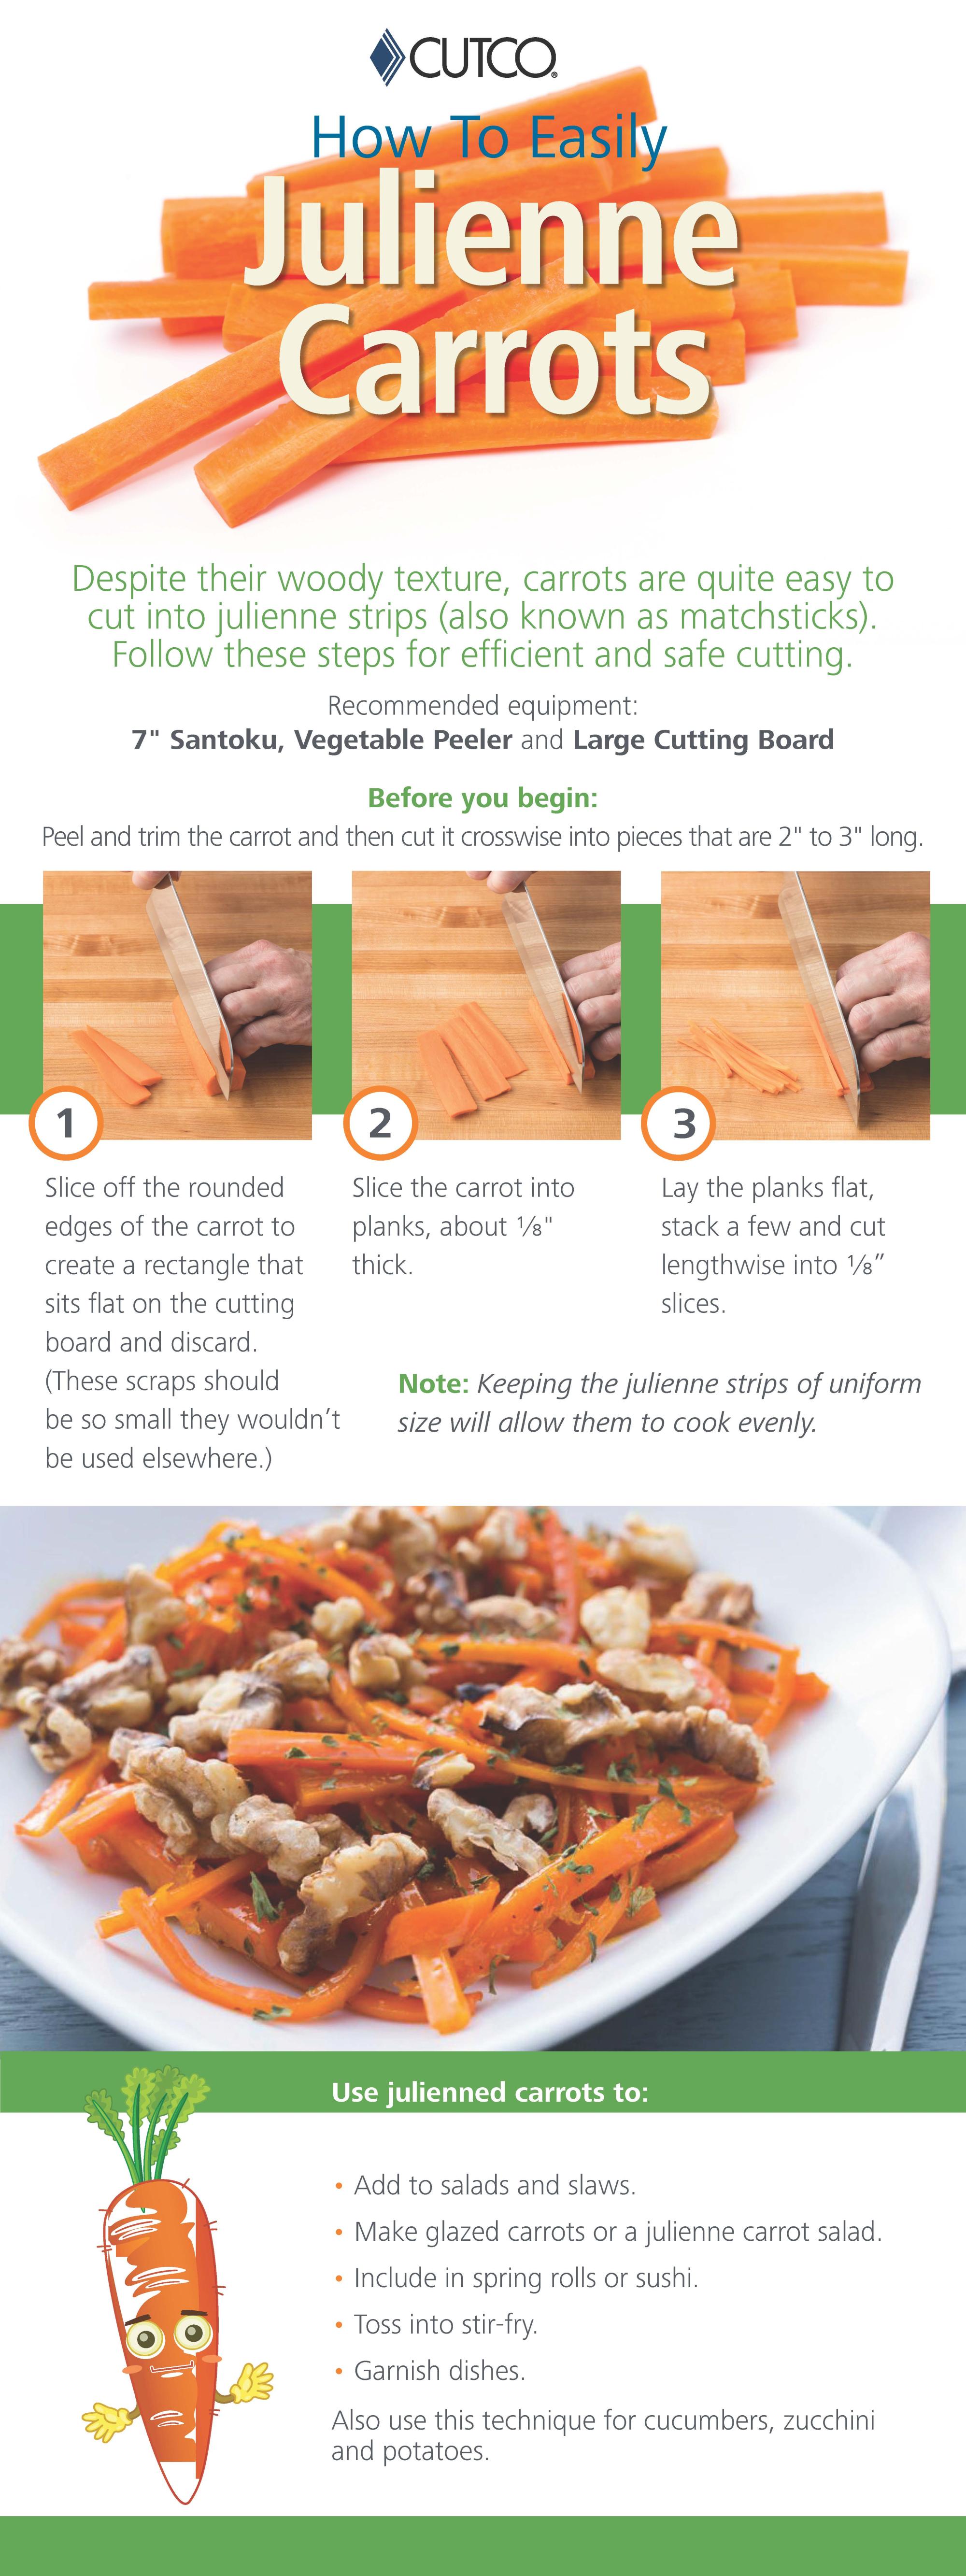 How To Easily Julienne Carrots